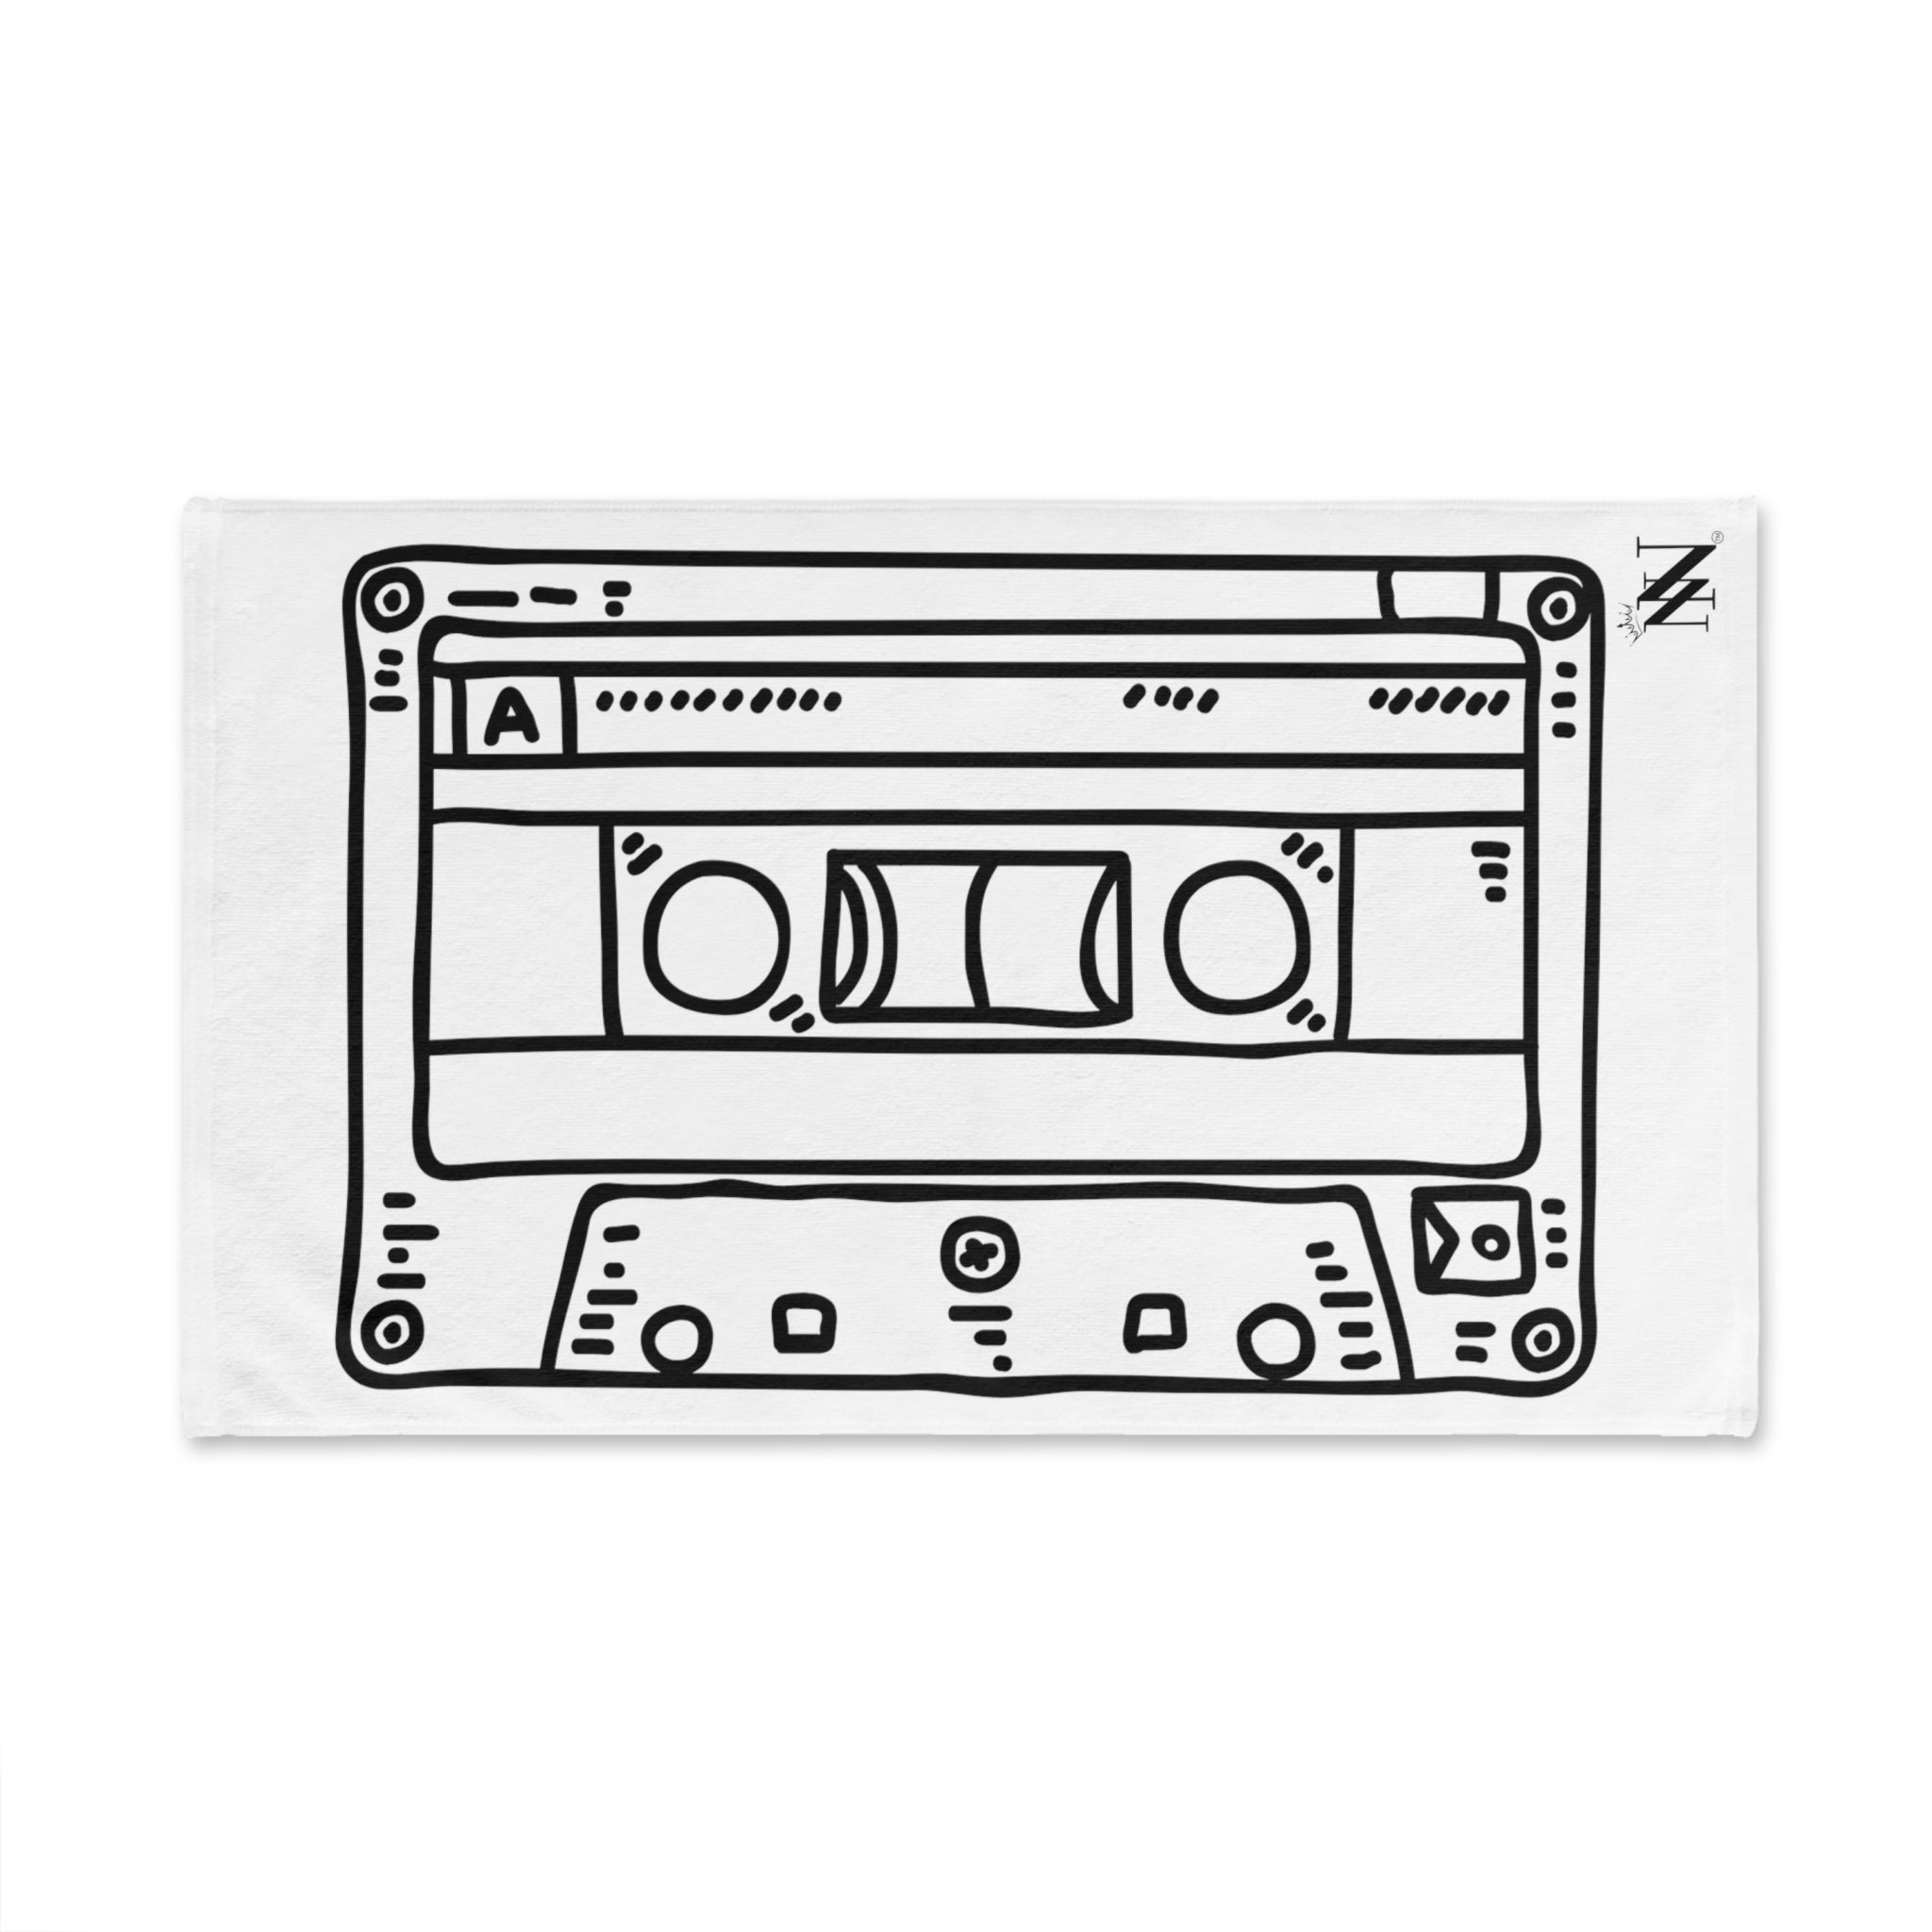 Cassette Black 80sWhite | Funny Gifts for Men - Gifts for Him - Birthday Gifts for Men, Him, Her, Husband, Boyfriend, Girlfriend, New Couple Gifts, Fathers & Valentines Day Gifts, Christmas Gifts NECTAR NAPKINS